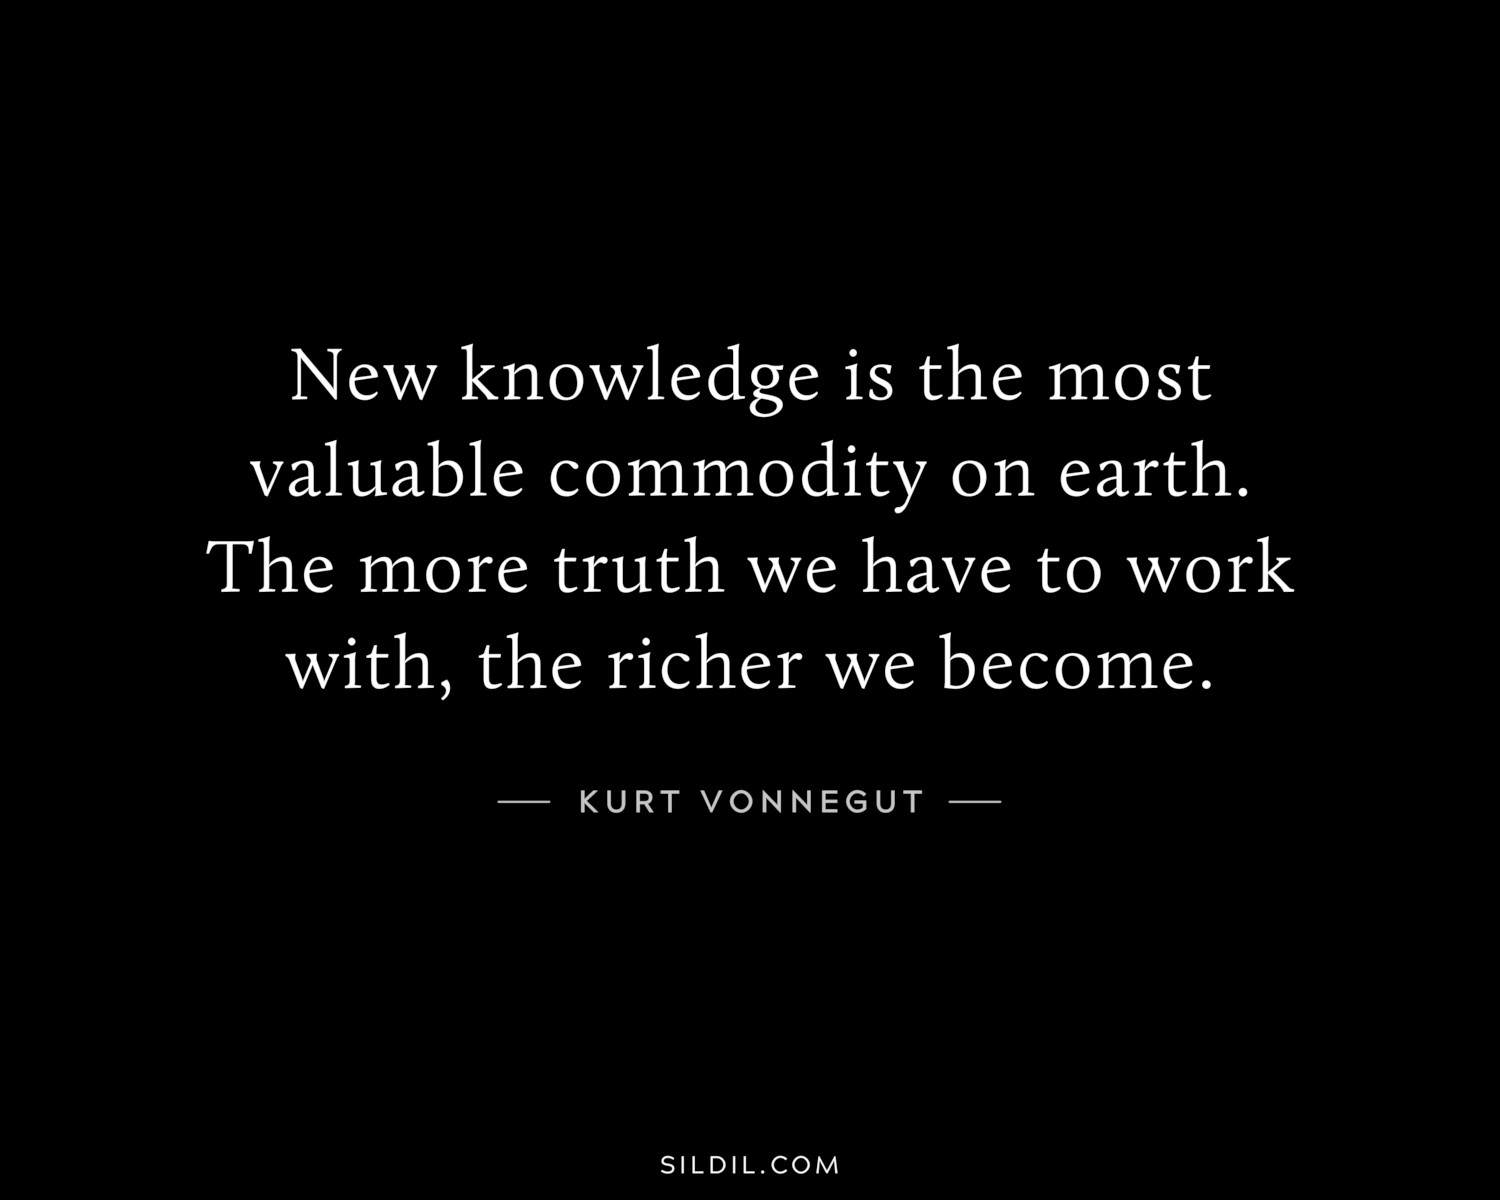 New knowledge is the most valuable commodity on earth. The more truth we have to work with, the richer we become.